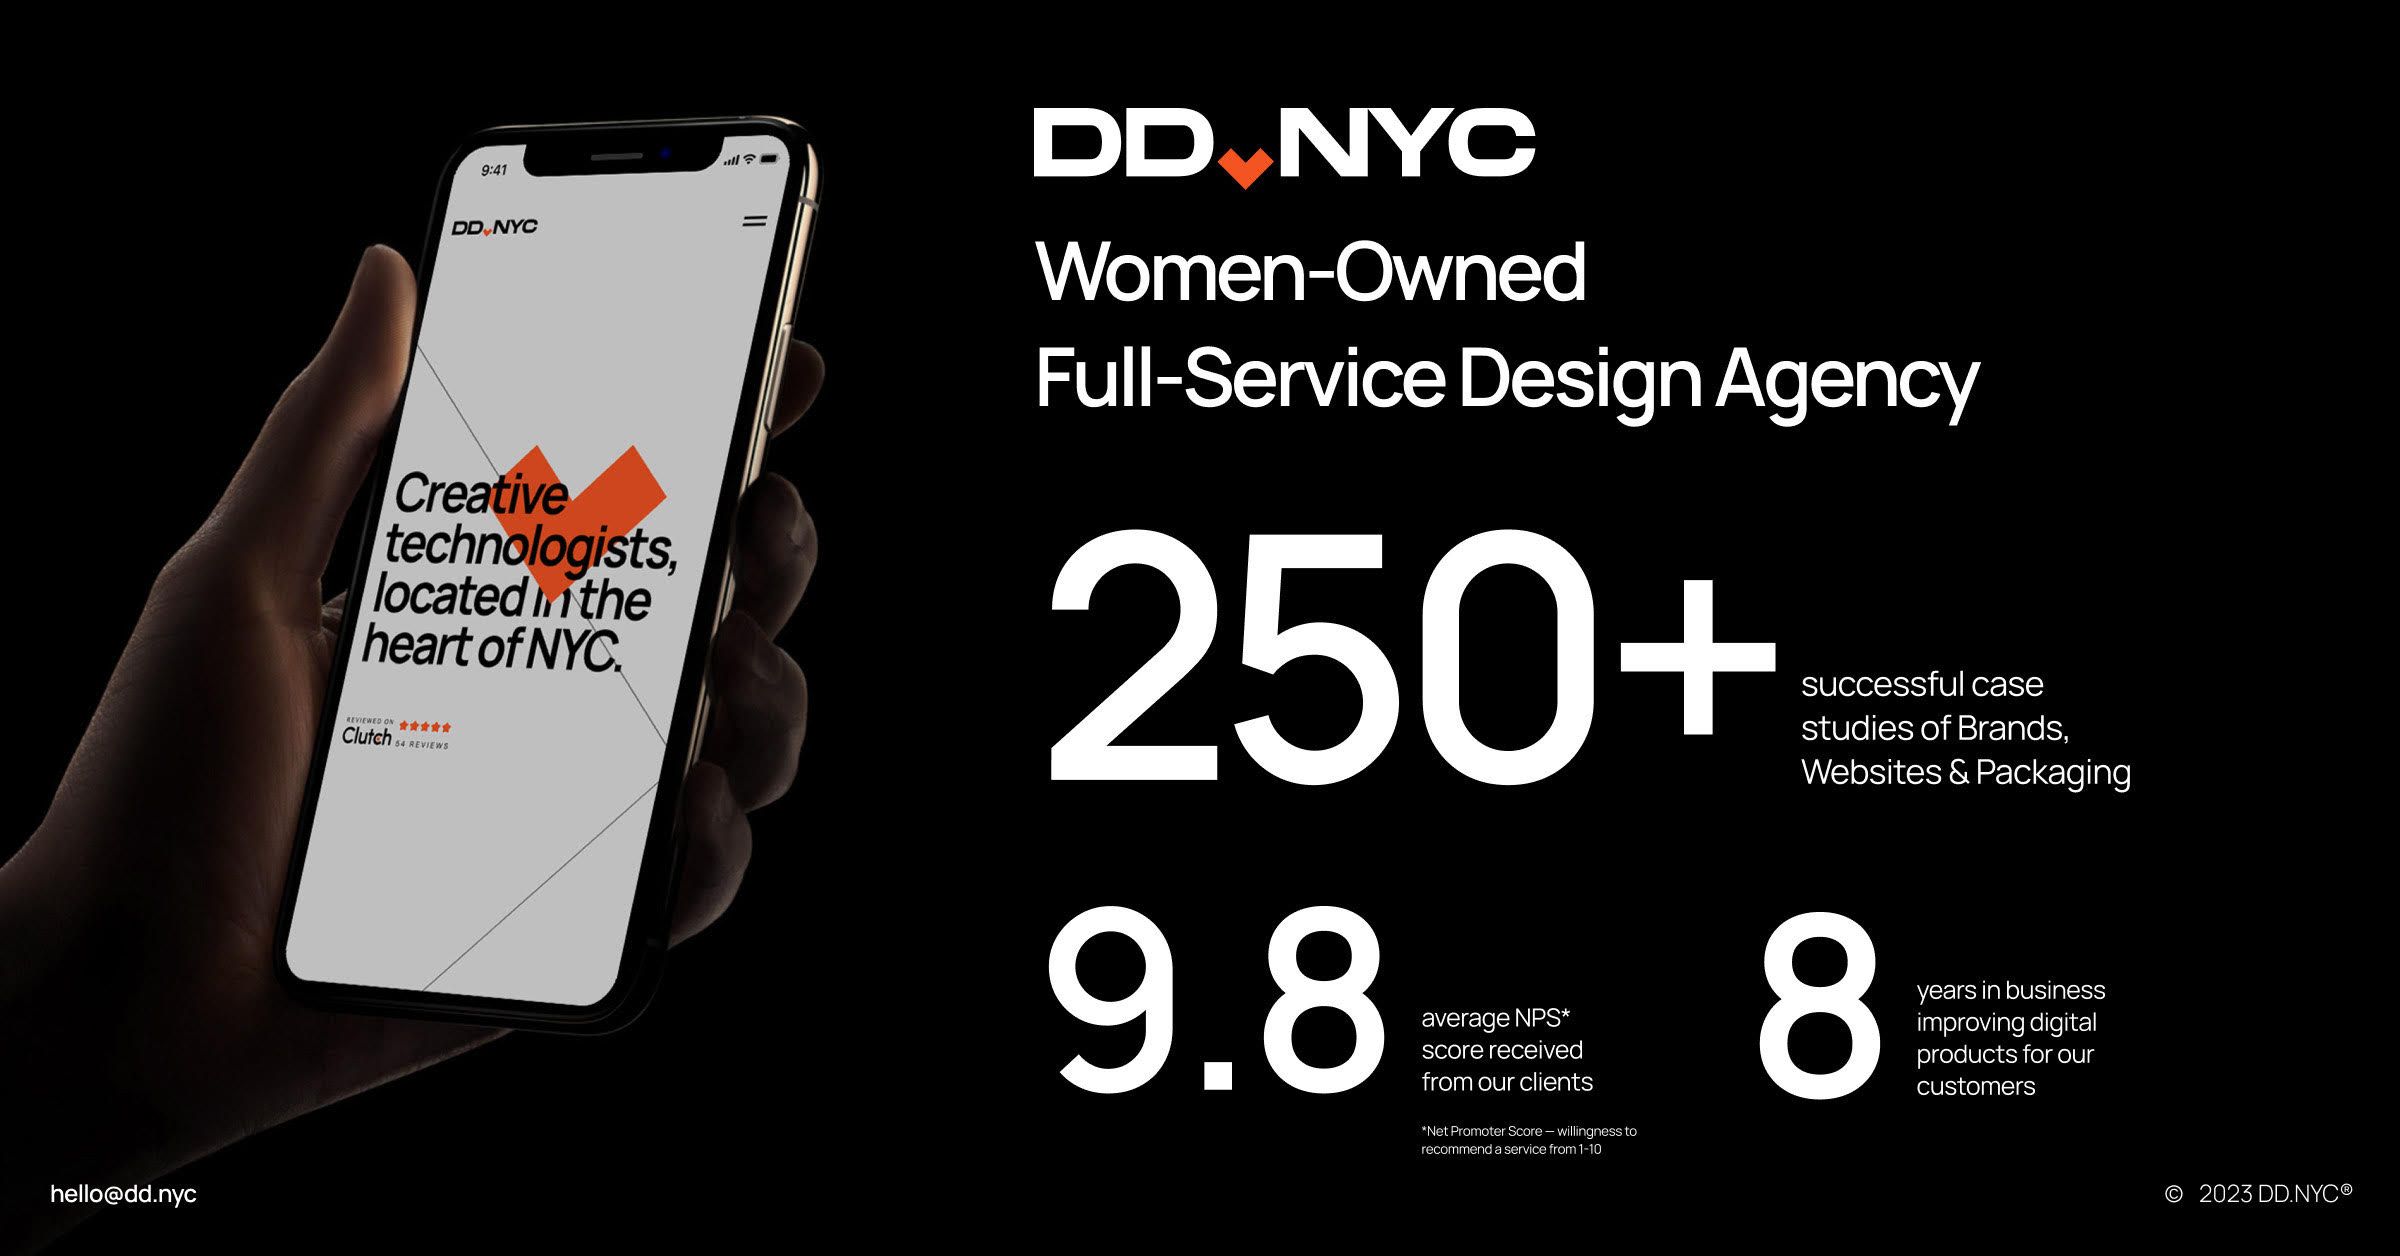 DD.NYC: Women-Owned Full-Service Design Agency